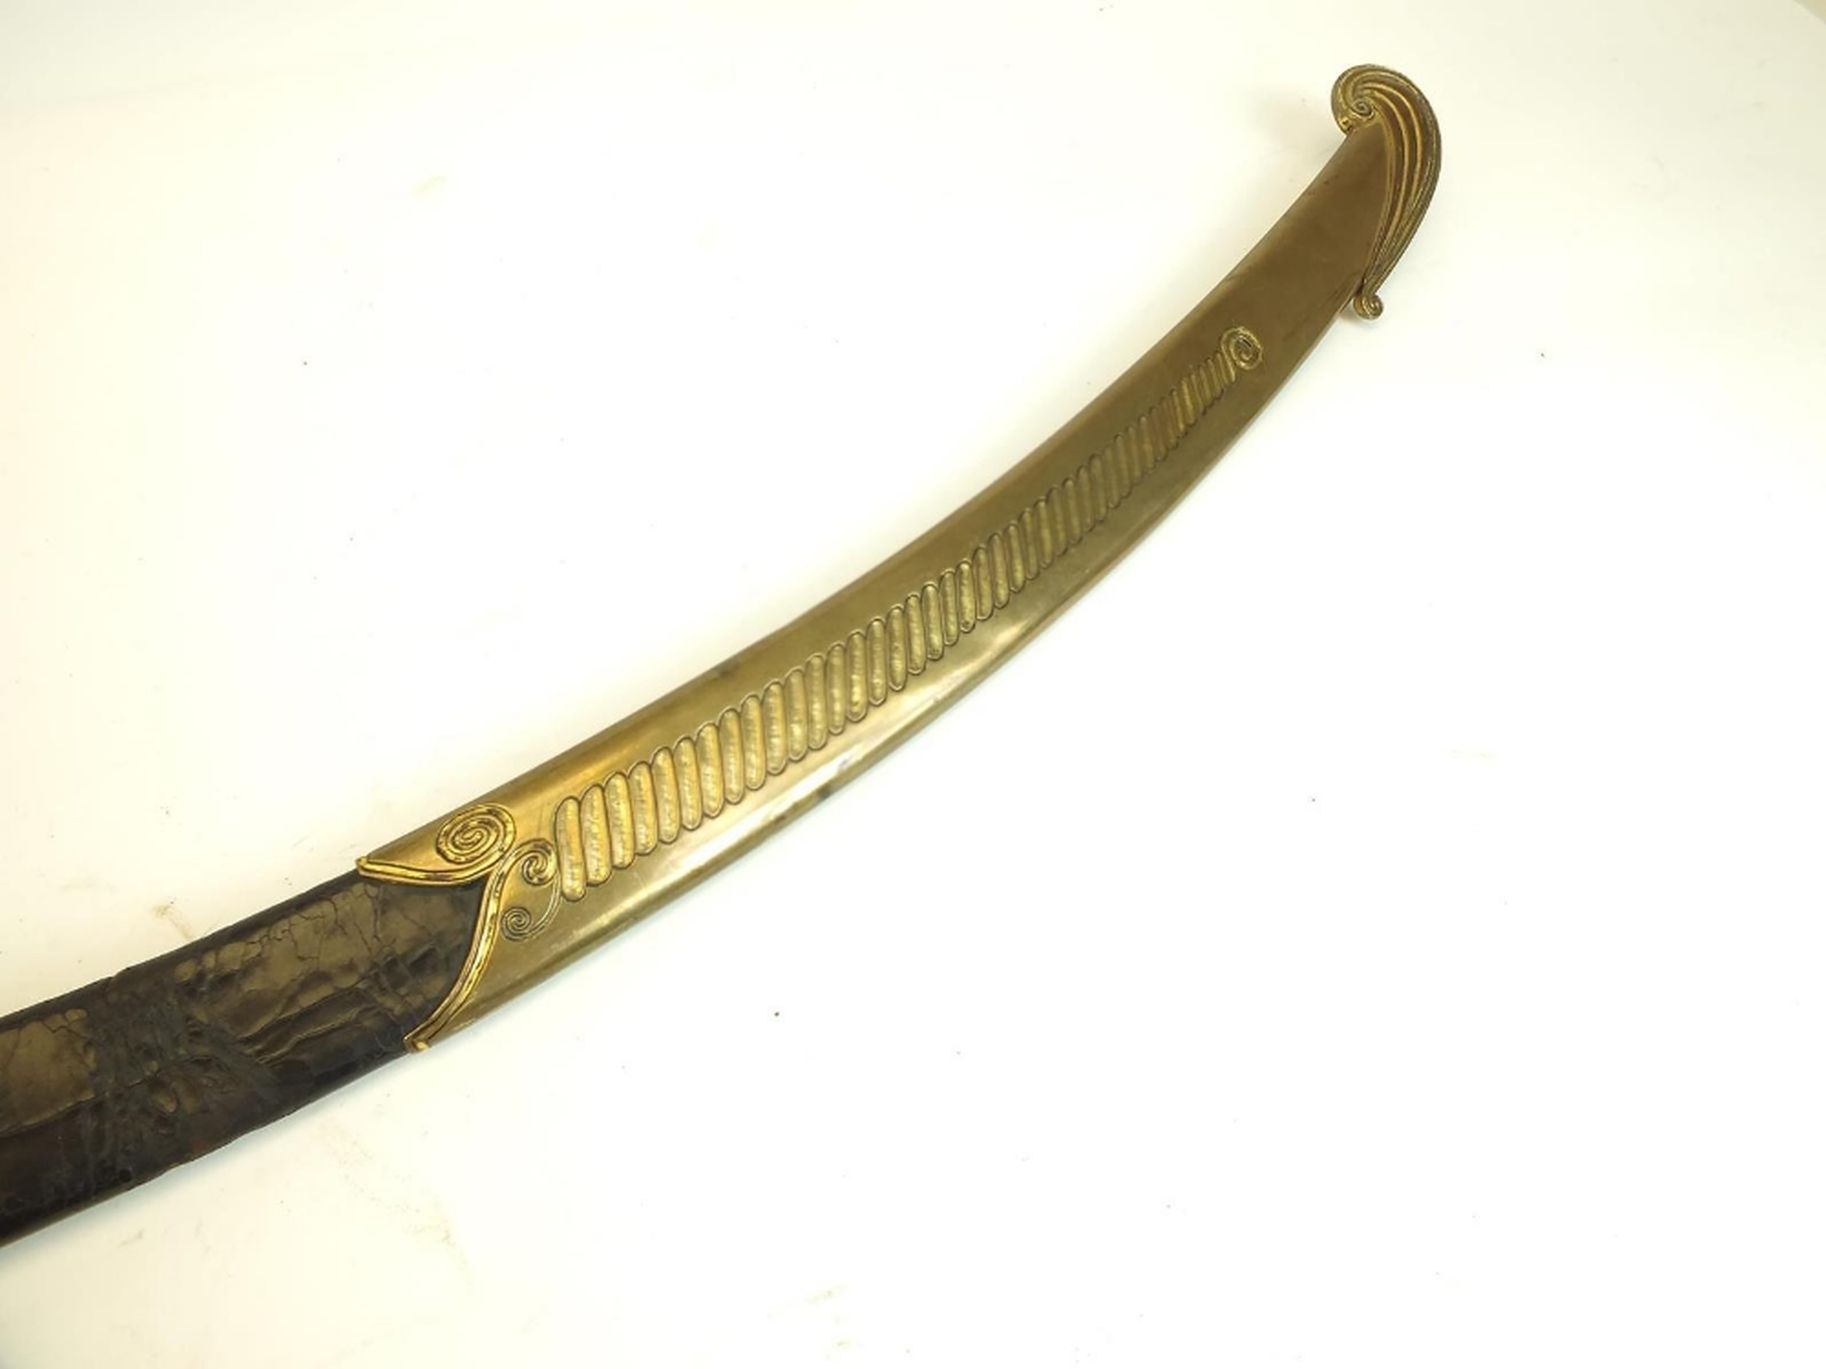 A LATE 18TH OR EARLY 19TH CENTURY PRESENTATION QUALITY SABRE BY PROSSER, 83cm sharply curved pipe- - Image 5 of 18